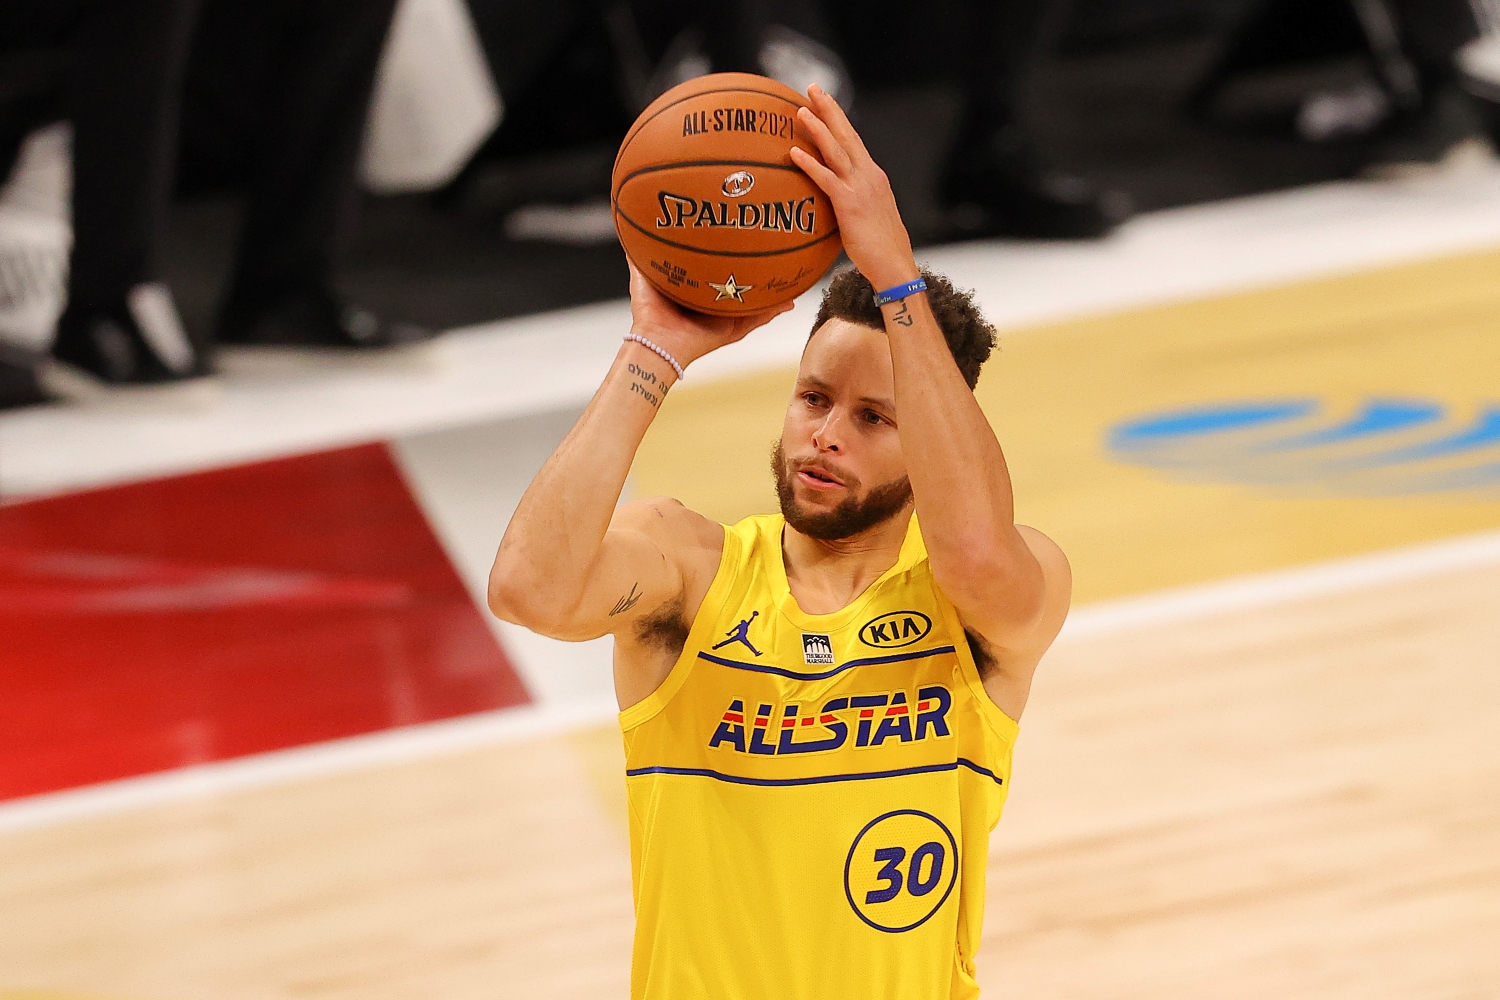 Stephen Curry Sent Game Dominant NBA a About Future His After His Chilling Warning Performance All-Star